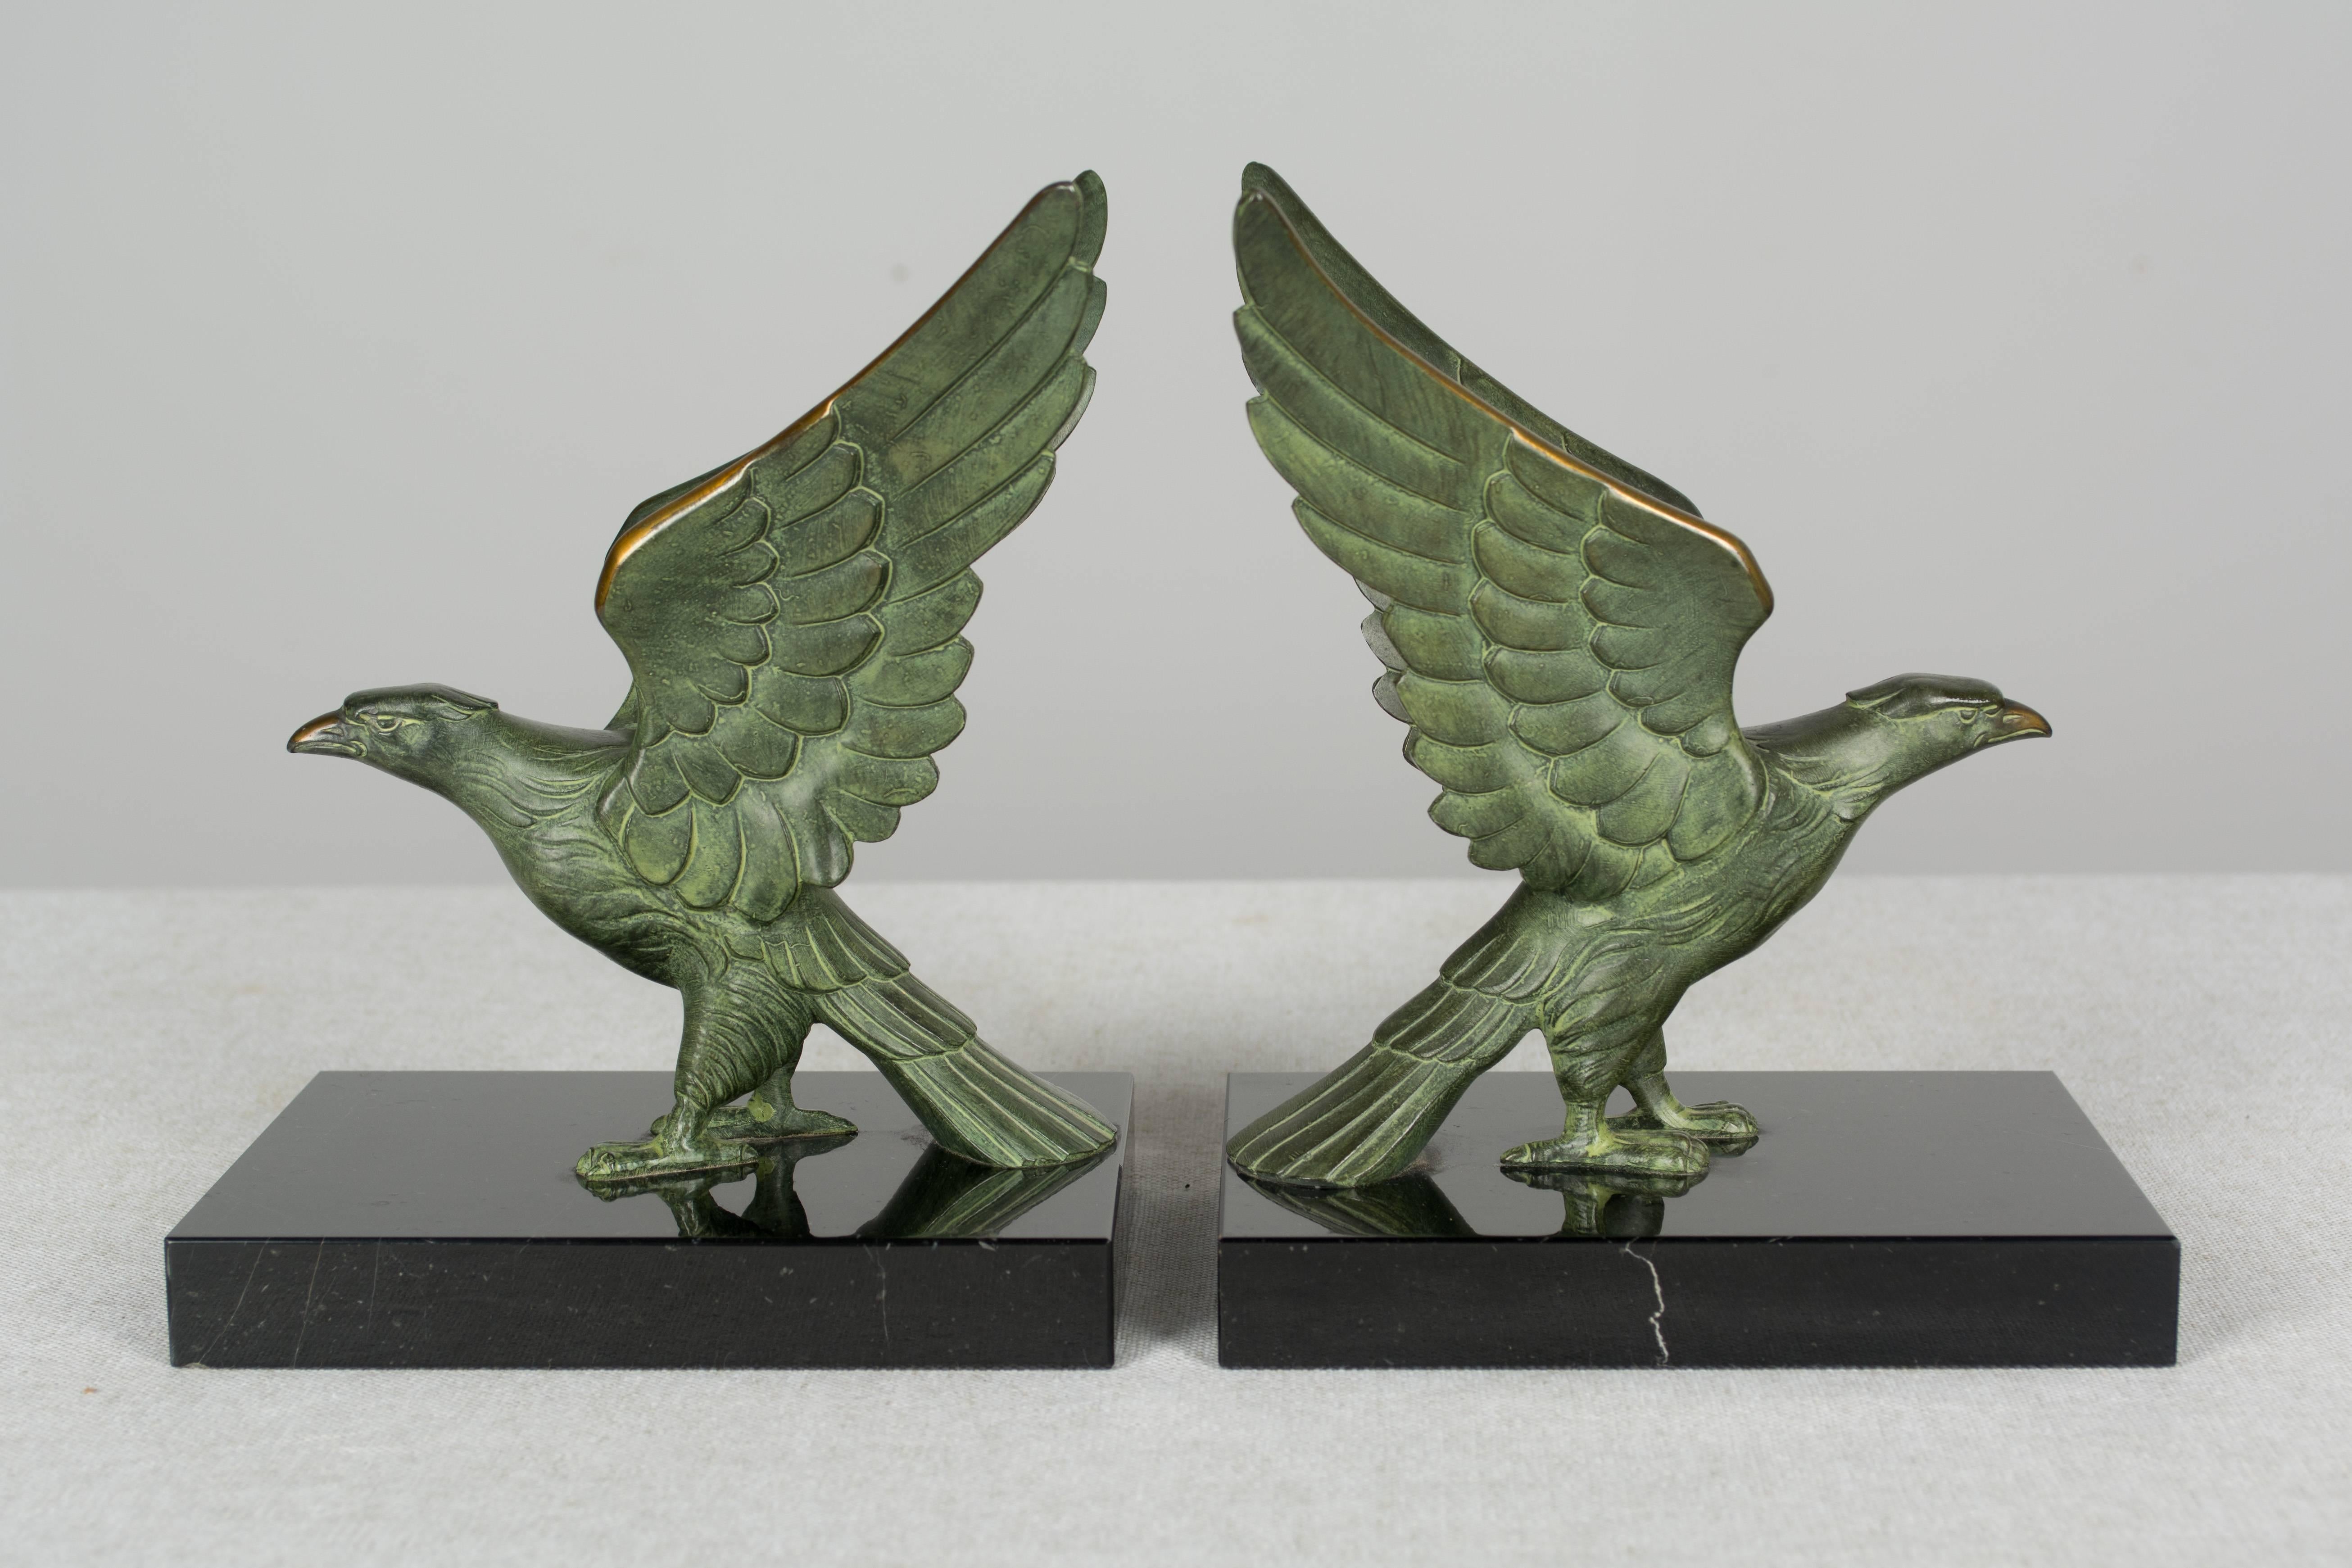 A set of French Art Deco cast bronze falcon bookends on black marble base. Beautiful green patina with polished golden highlights on the beak and wings. More photos available upon request. We have a large selection of French antiques at Olivier